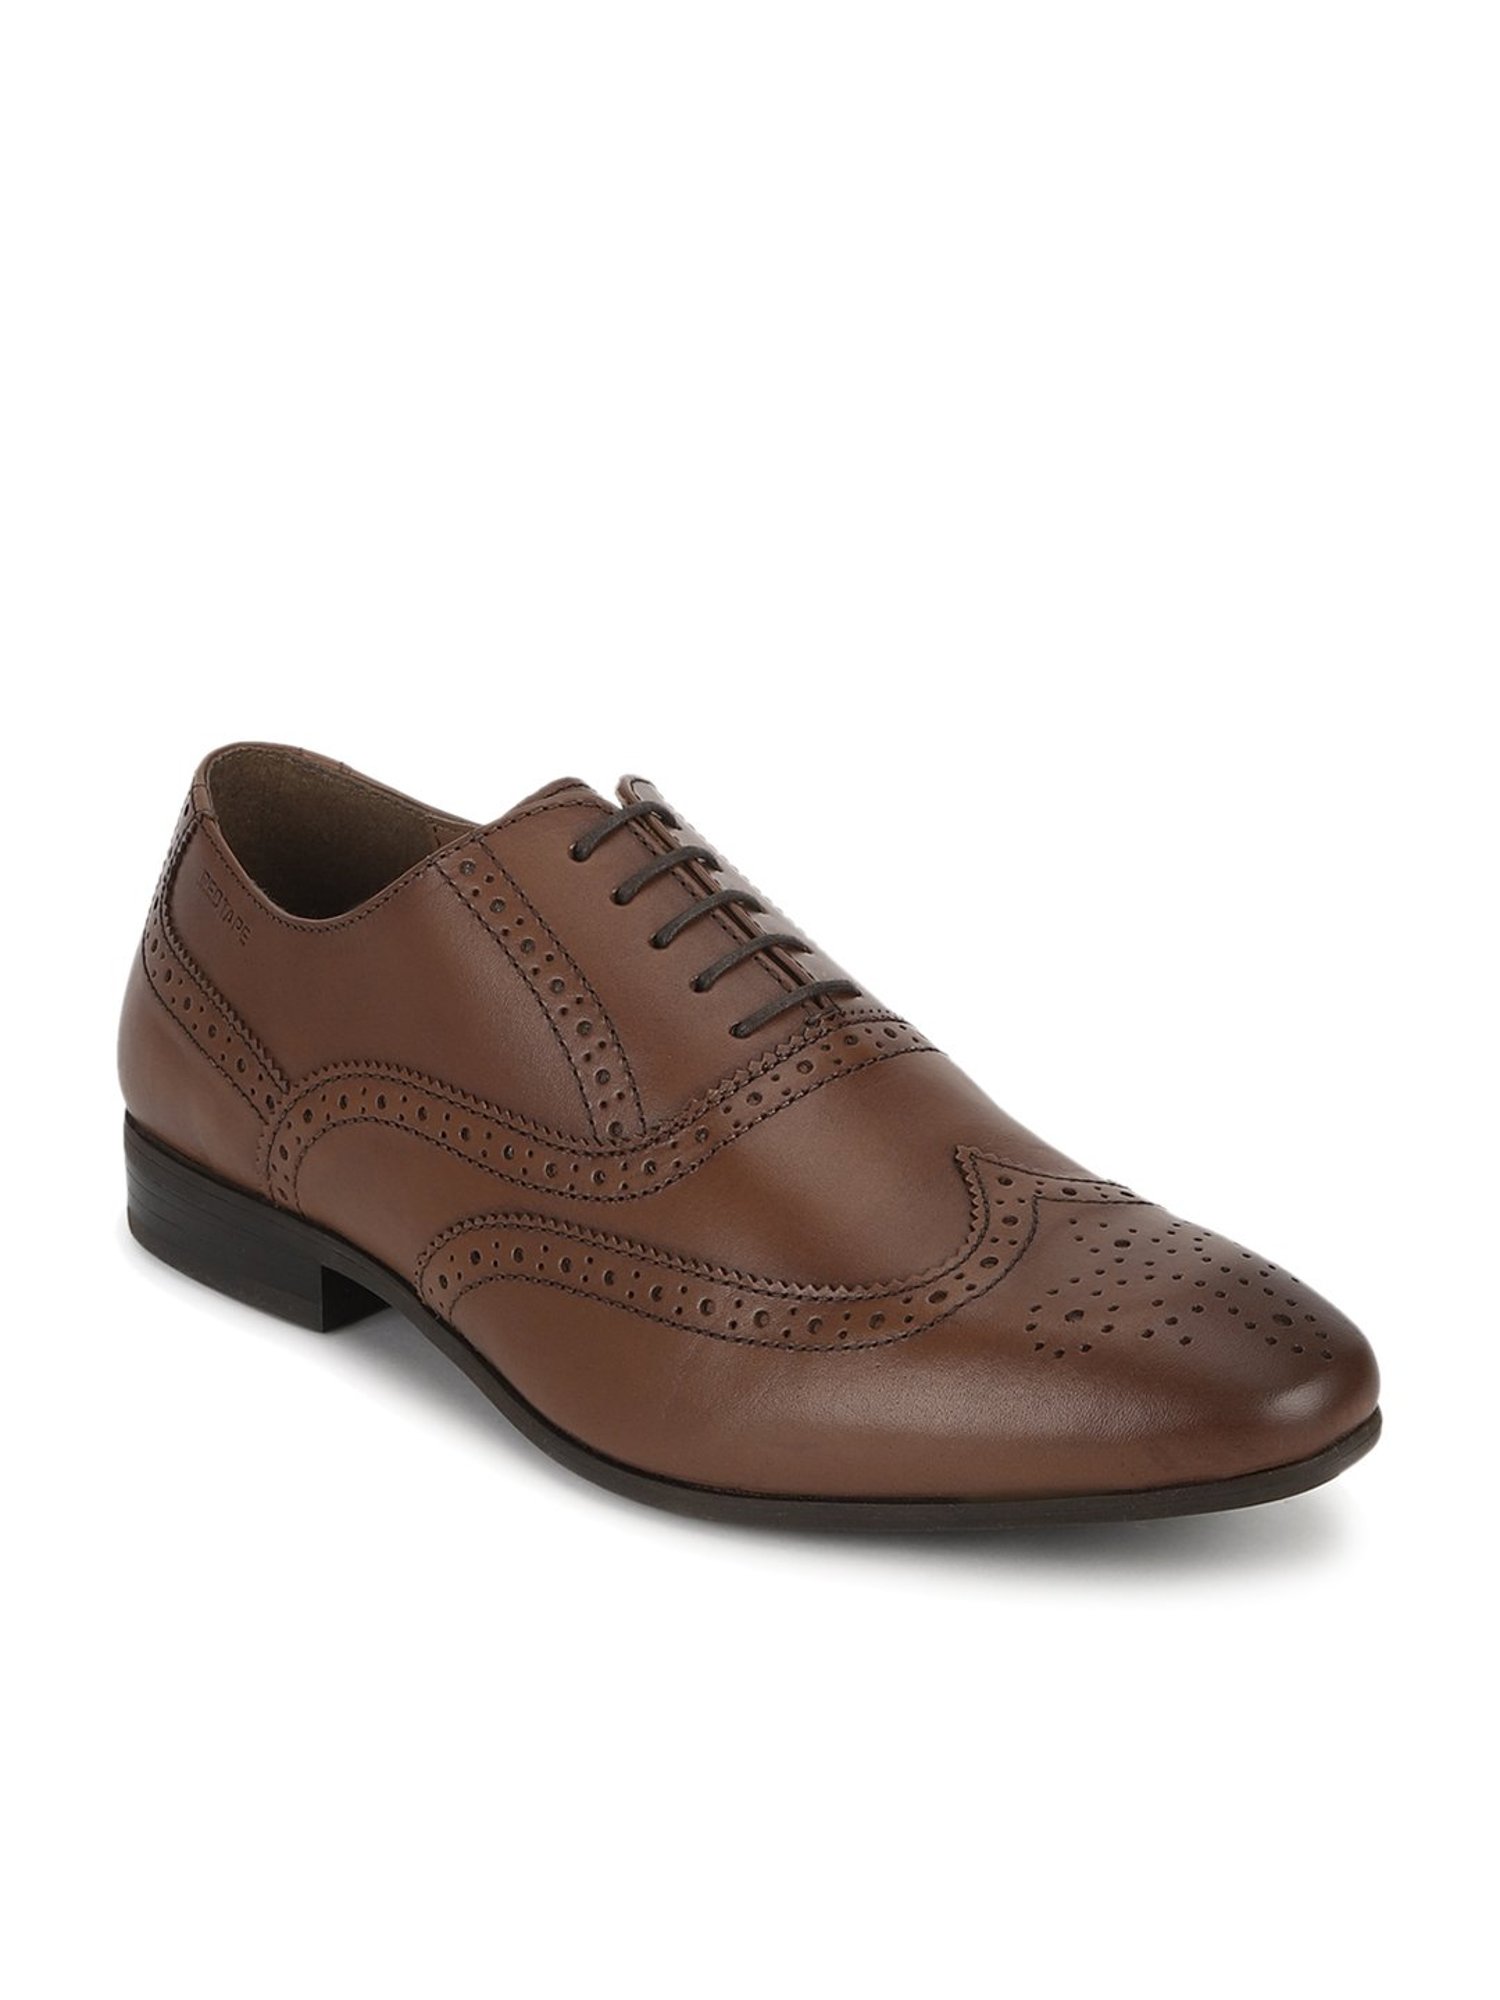 red tape tan brogue shoes